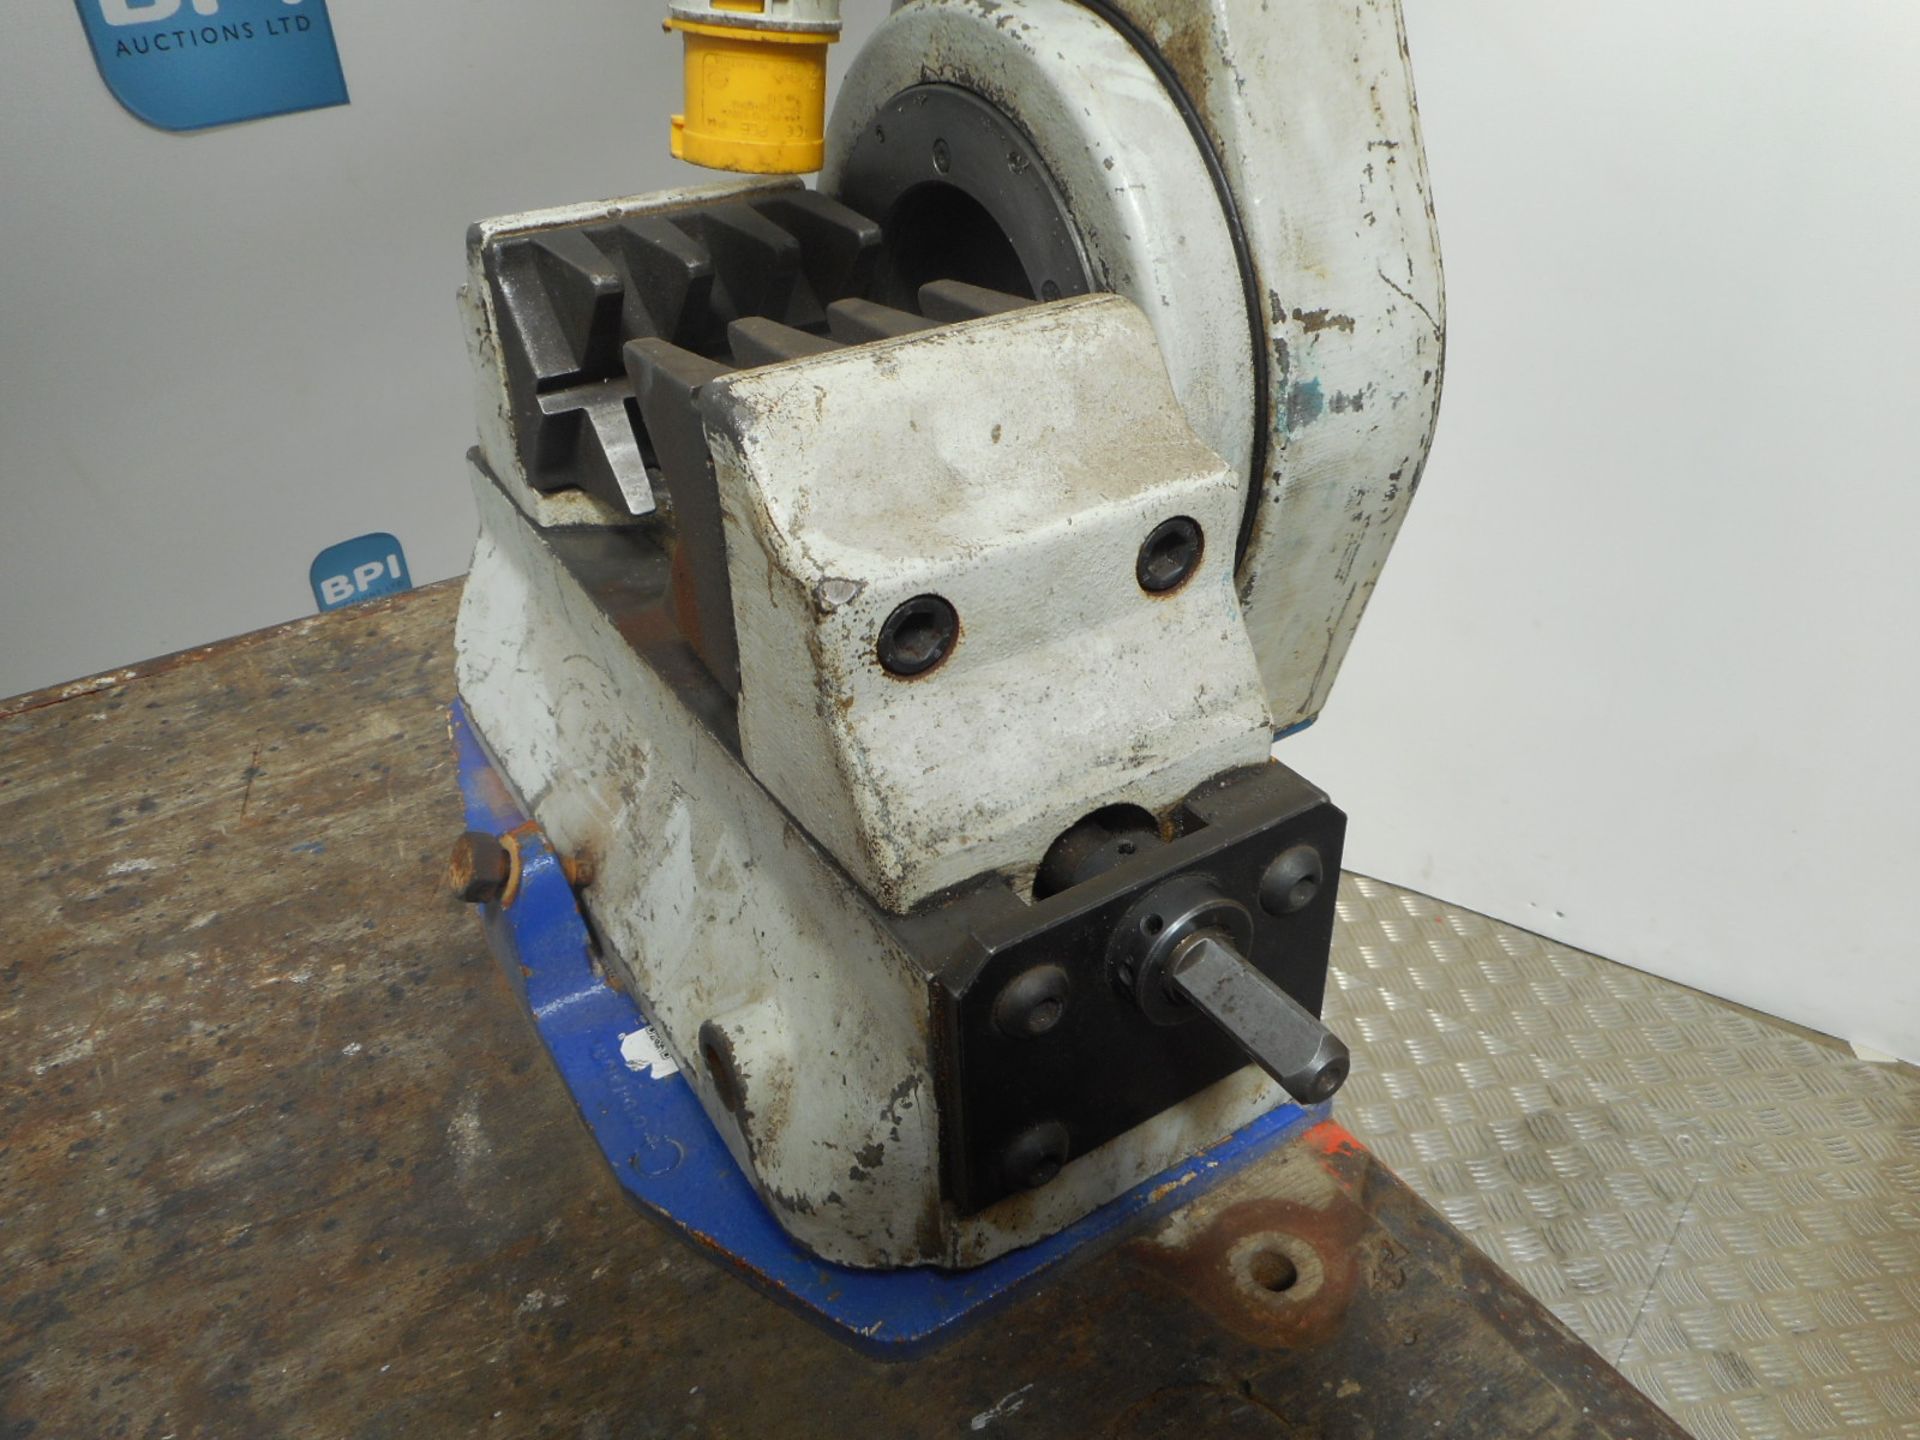 GEORG FISCHER RA 4 {032556} PIPE CUTTING/ BEVELING MACHINE AND TUBE SAW CUTTER 1/2 - 4INCH WITH W - Image 4 of 7